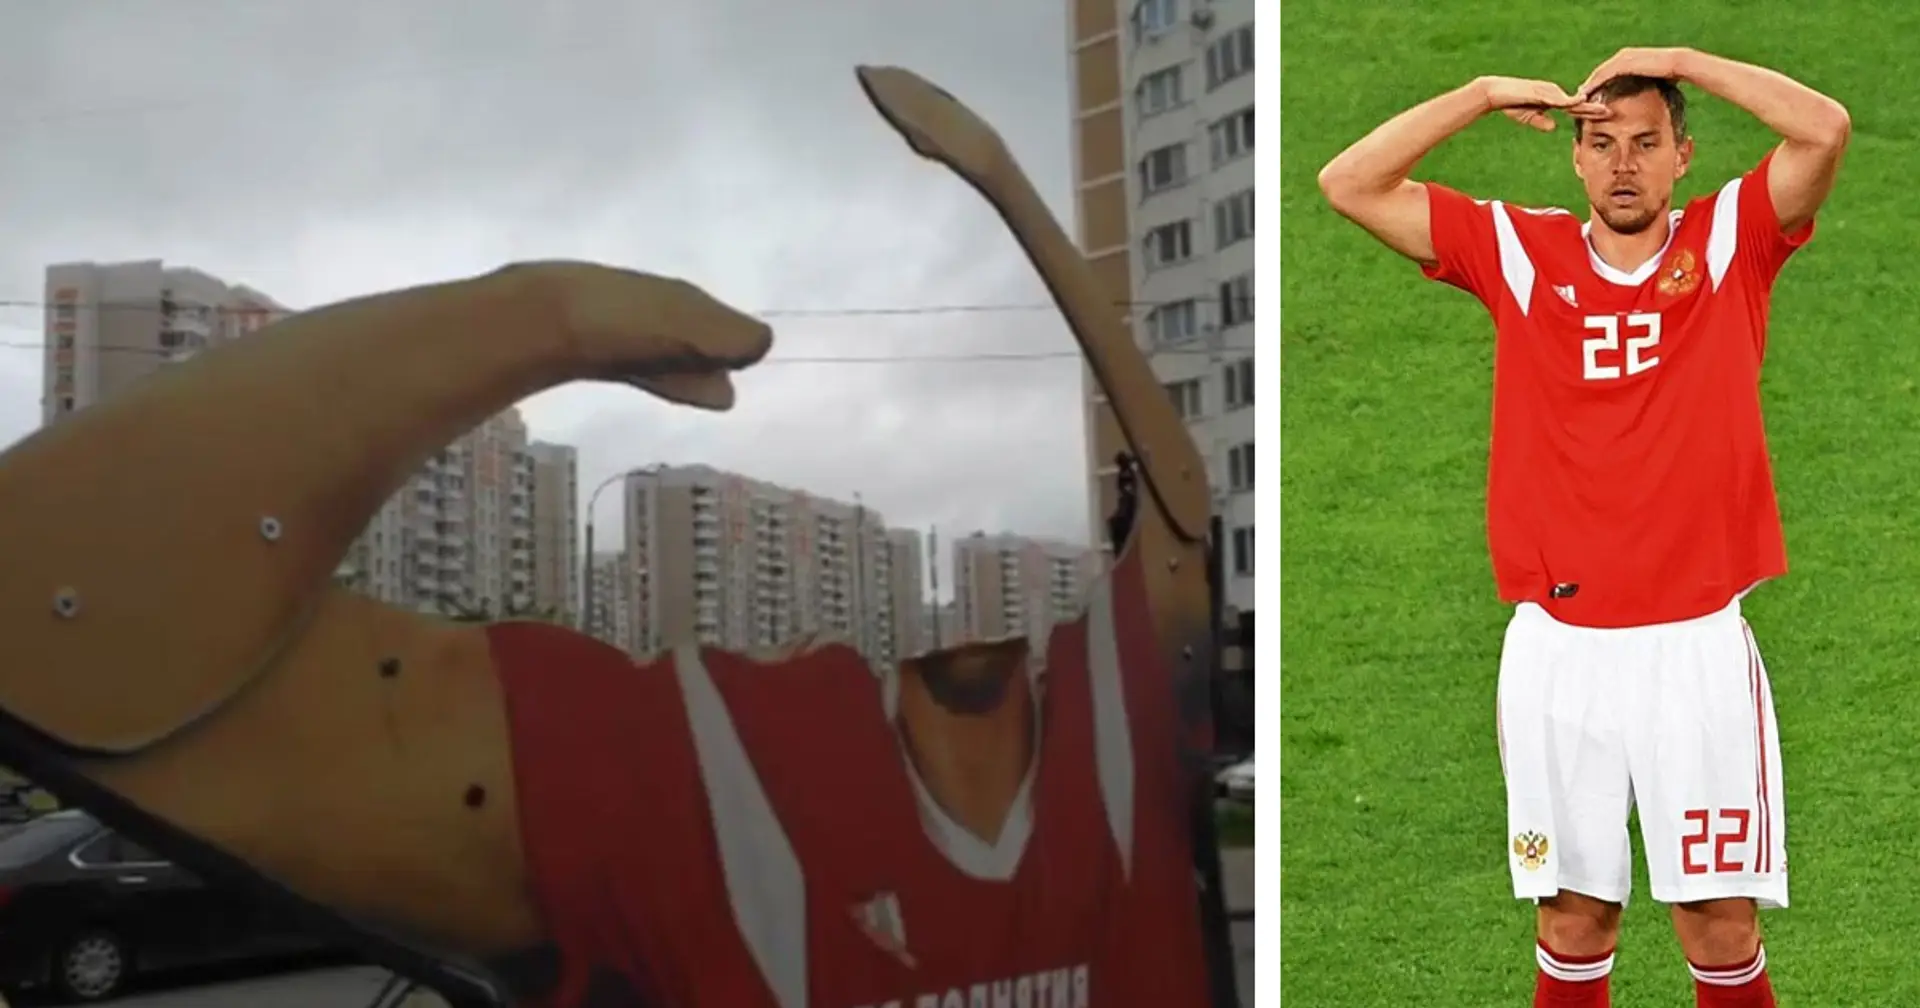 Russia NT captain statue decapitated, offenders fined €7 each